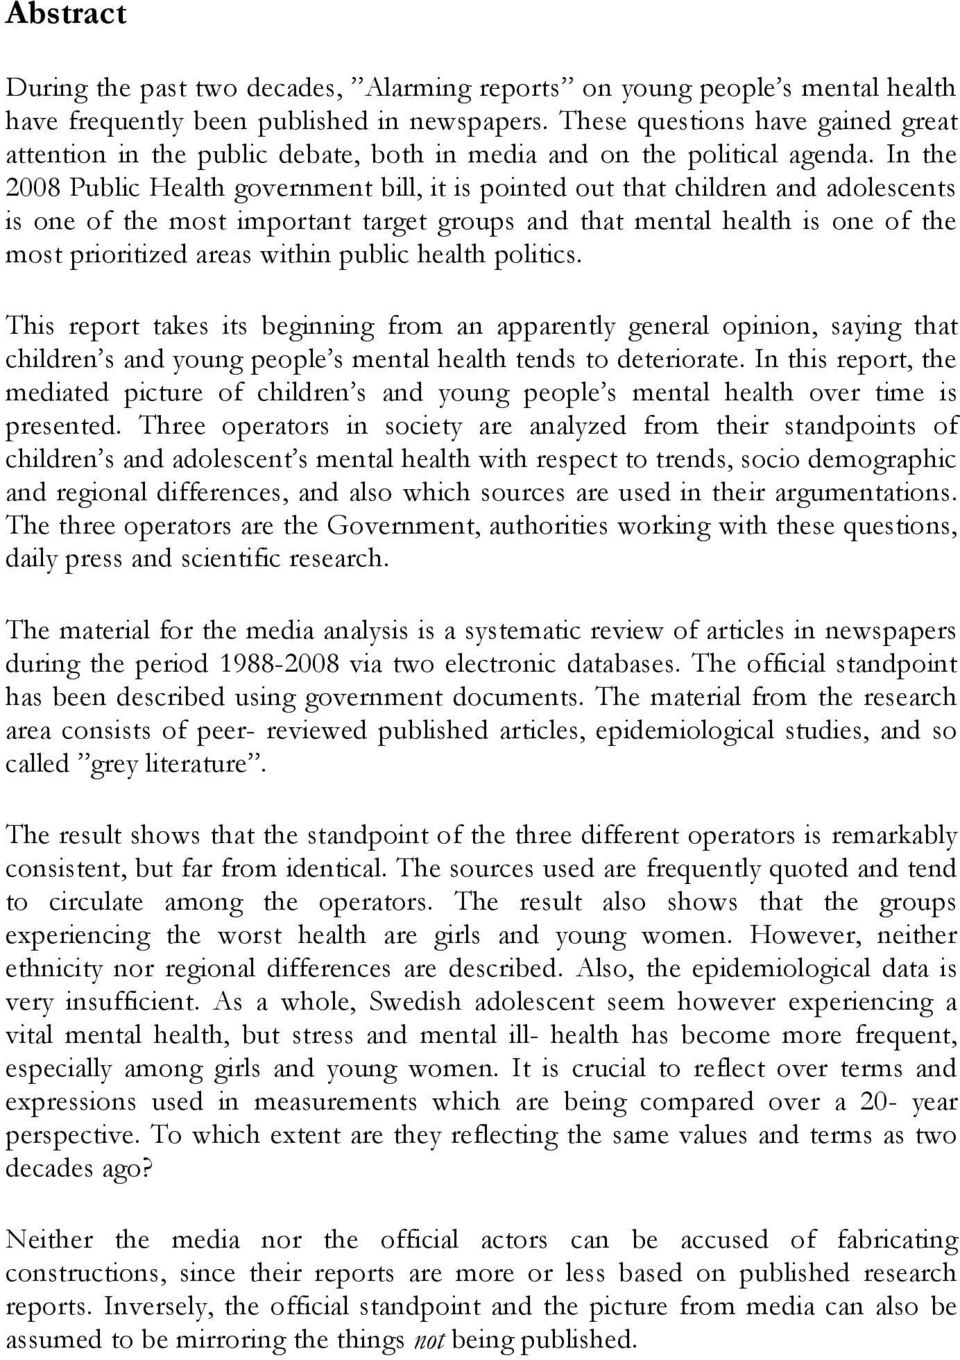 In the 2008 Public Health government bill, it is pointed out that children and adolescents is one of the most important target groups and that mental health is one of the most prioritized areas